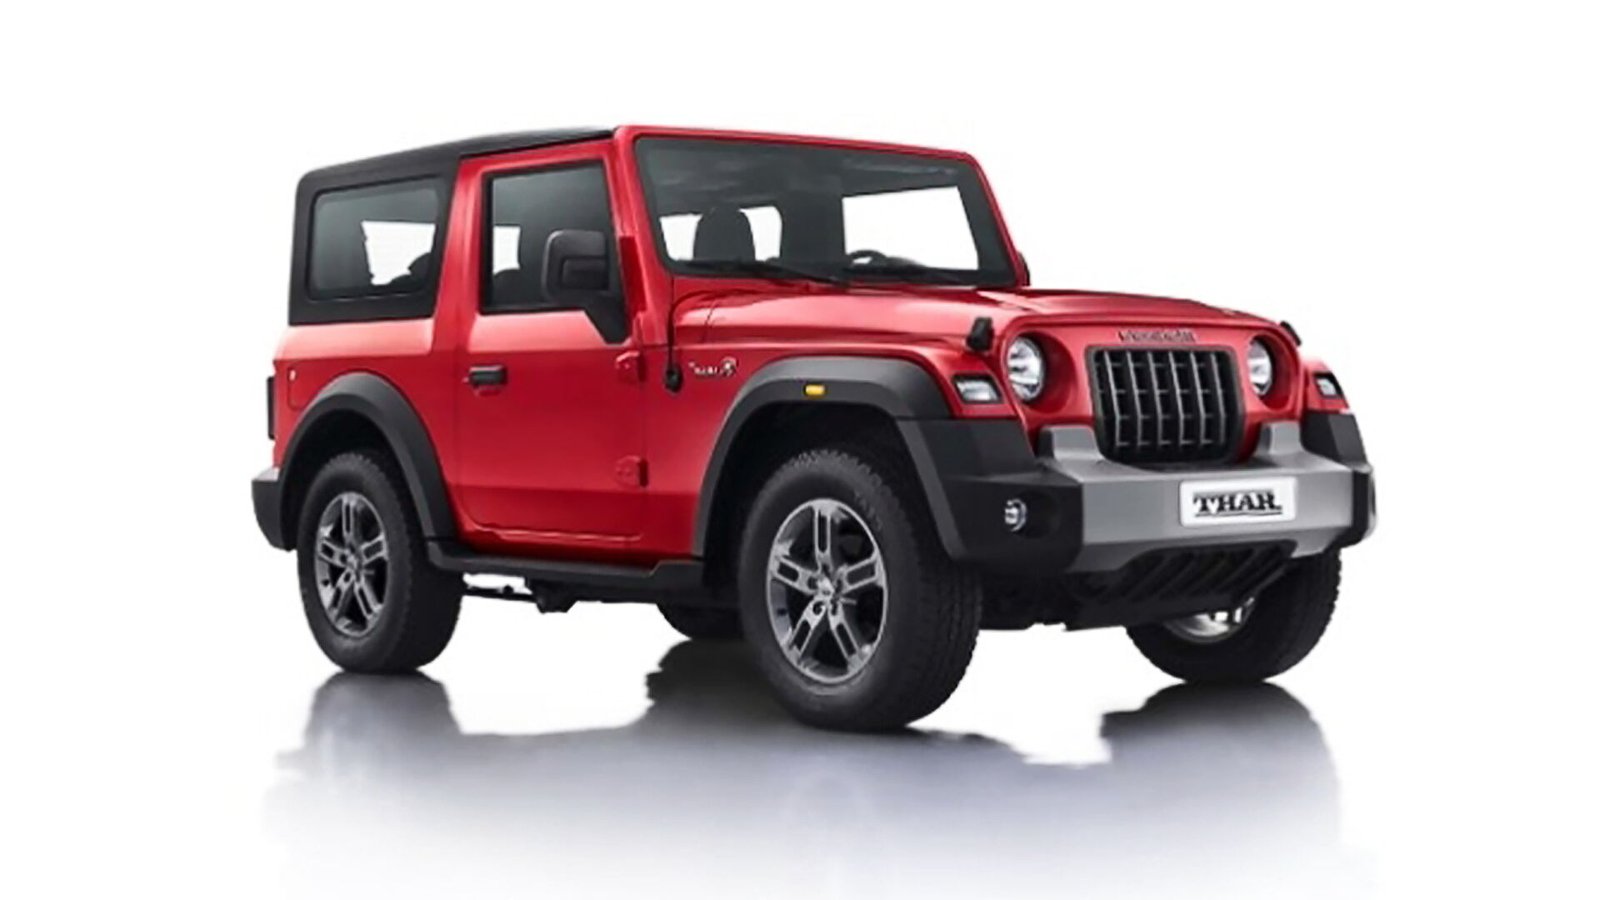 A Thar available for Self Drive Car Rental in Delhi.